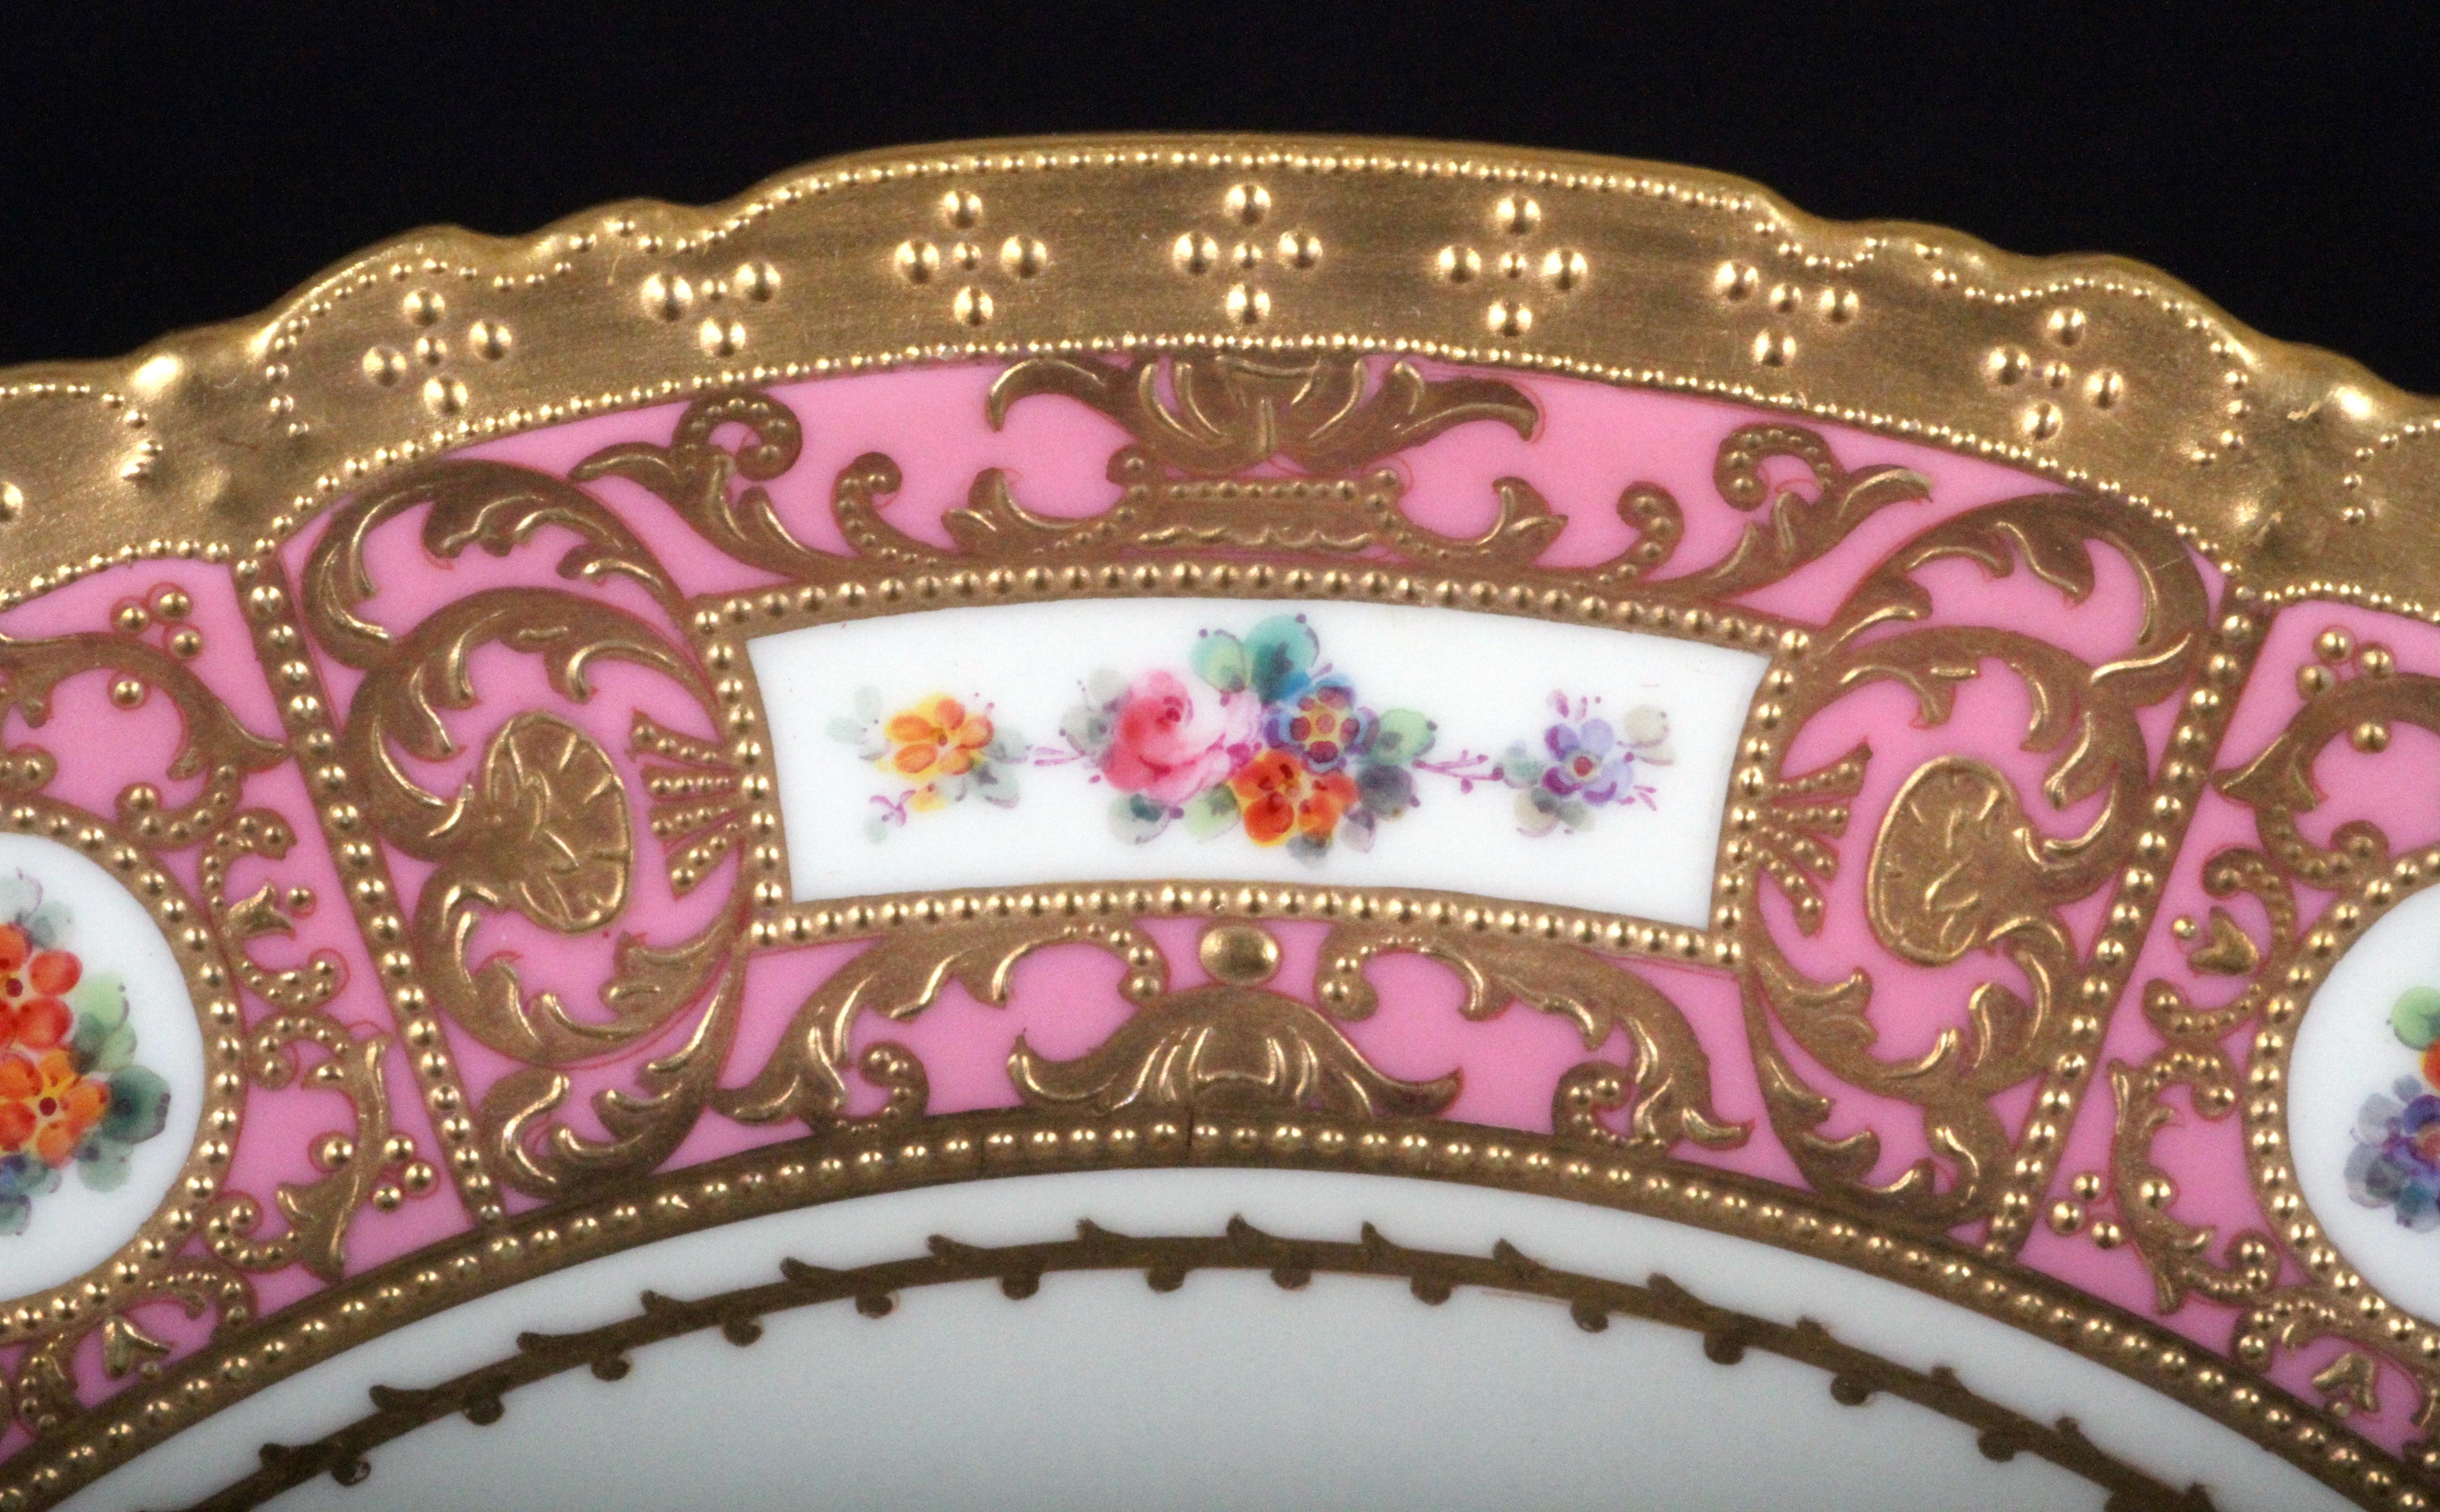 11 Derby for Tiffany Hand Painted and Gilded Pink Service Plates In Excellent Condition For Sale In New York, NY